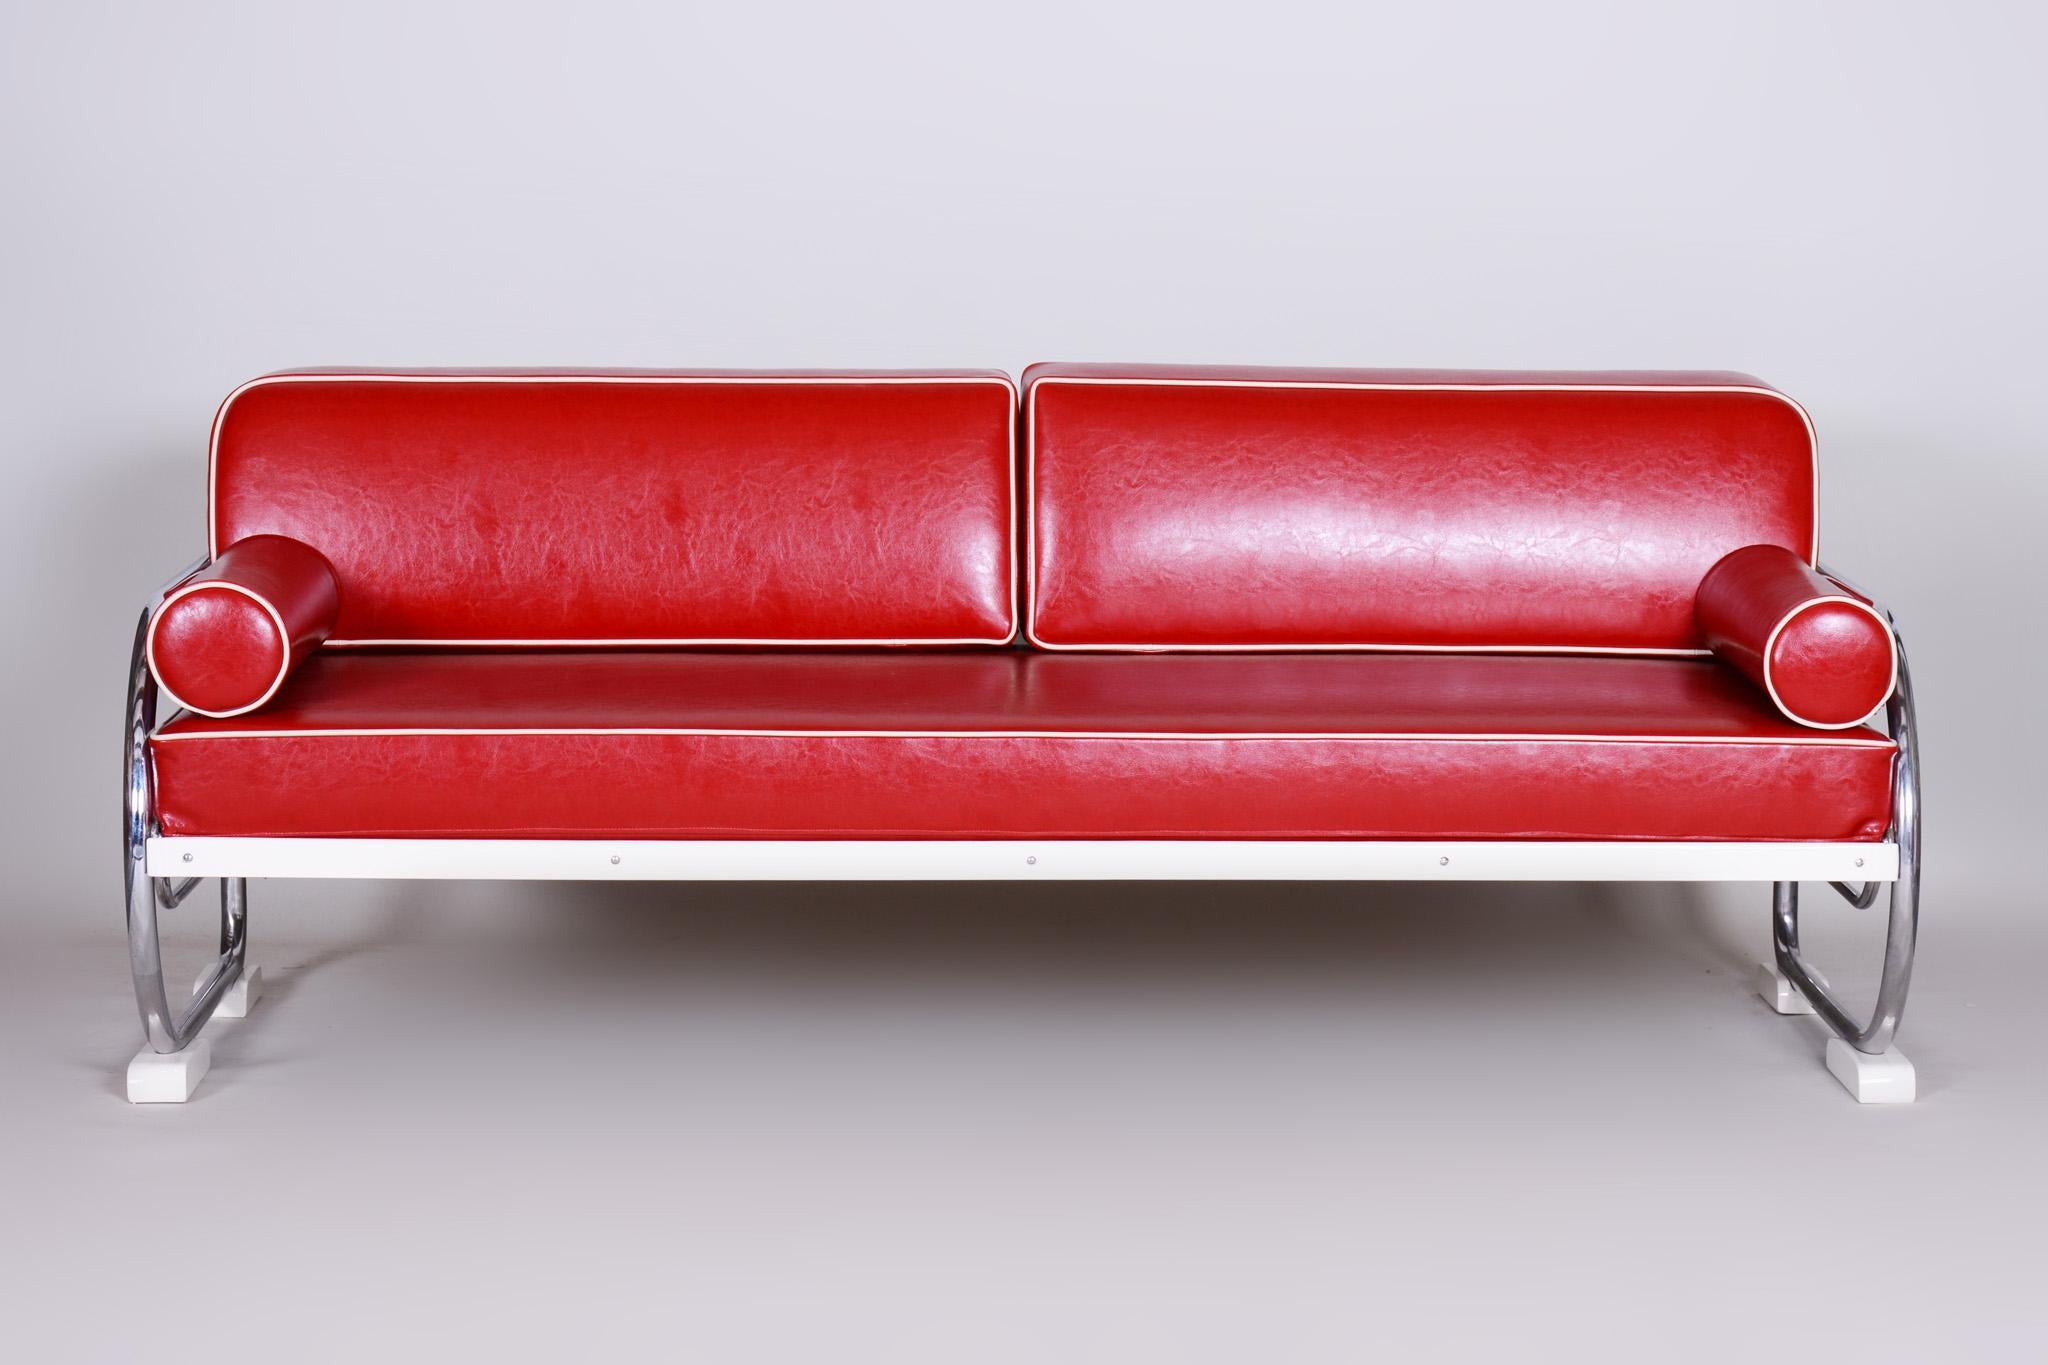 Bauhaus style sofa with a lacquered wood and chrome tubular steel frame.
Manufactured by Robert Slezák in the 1930s.
Chrome tubular steel is in perfect original condition.
Upholstered to high quality red leather.
Source: Czechoslovakia.